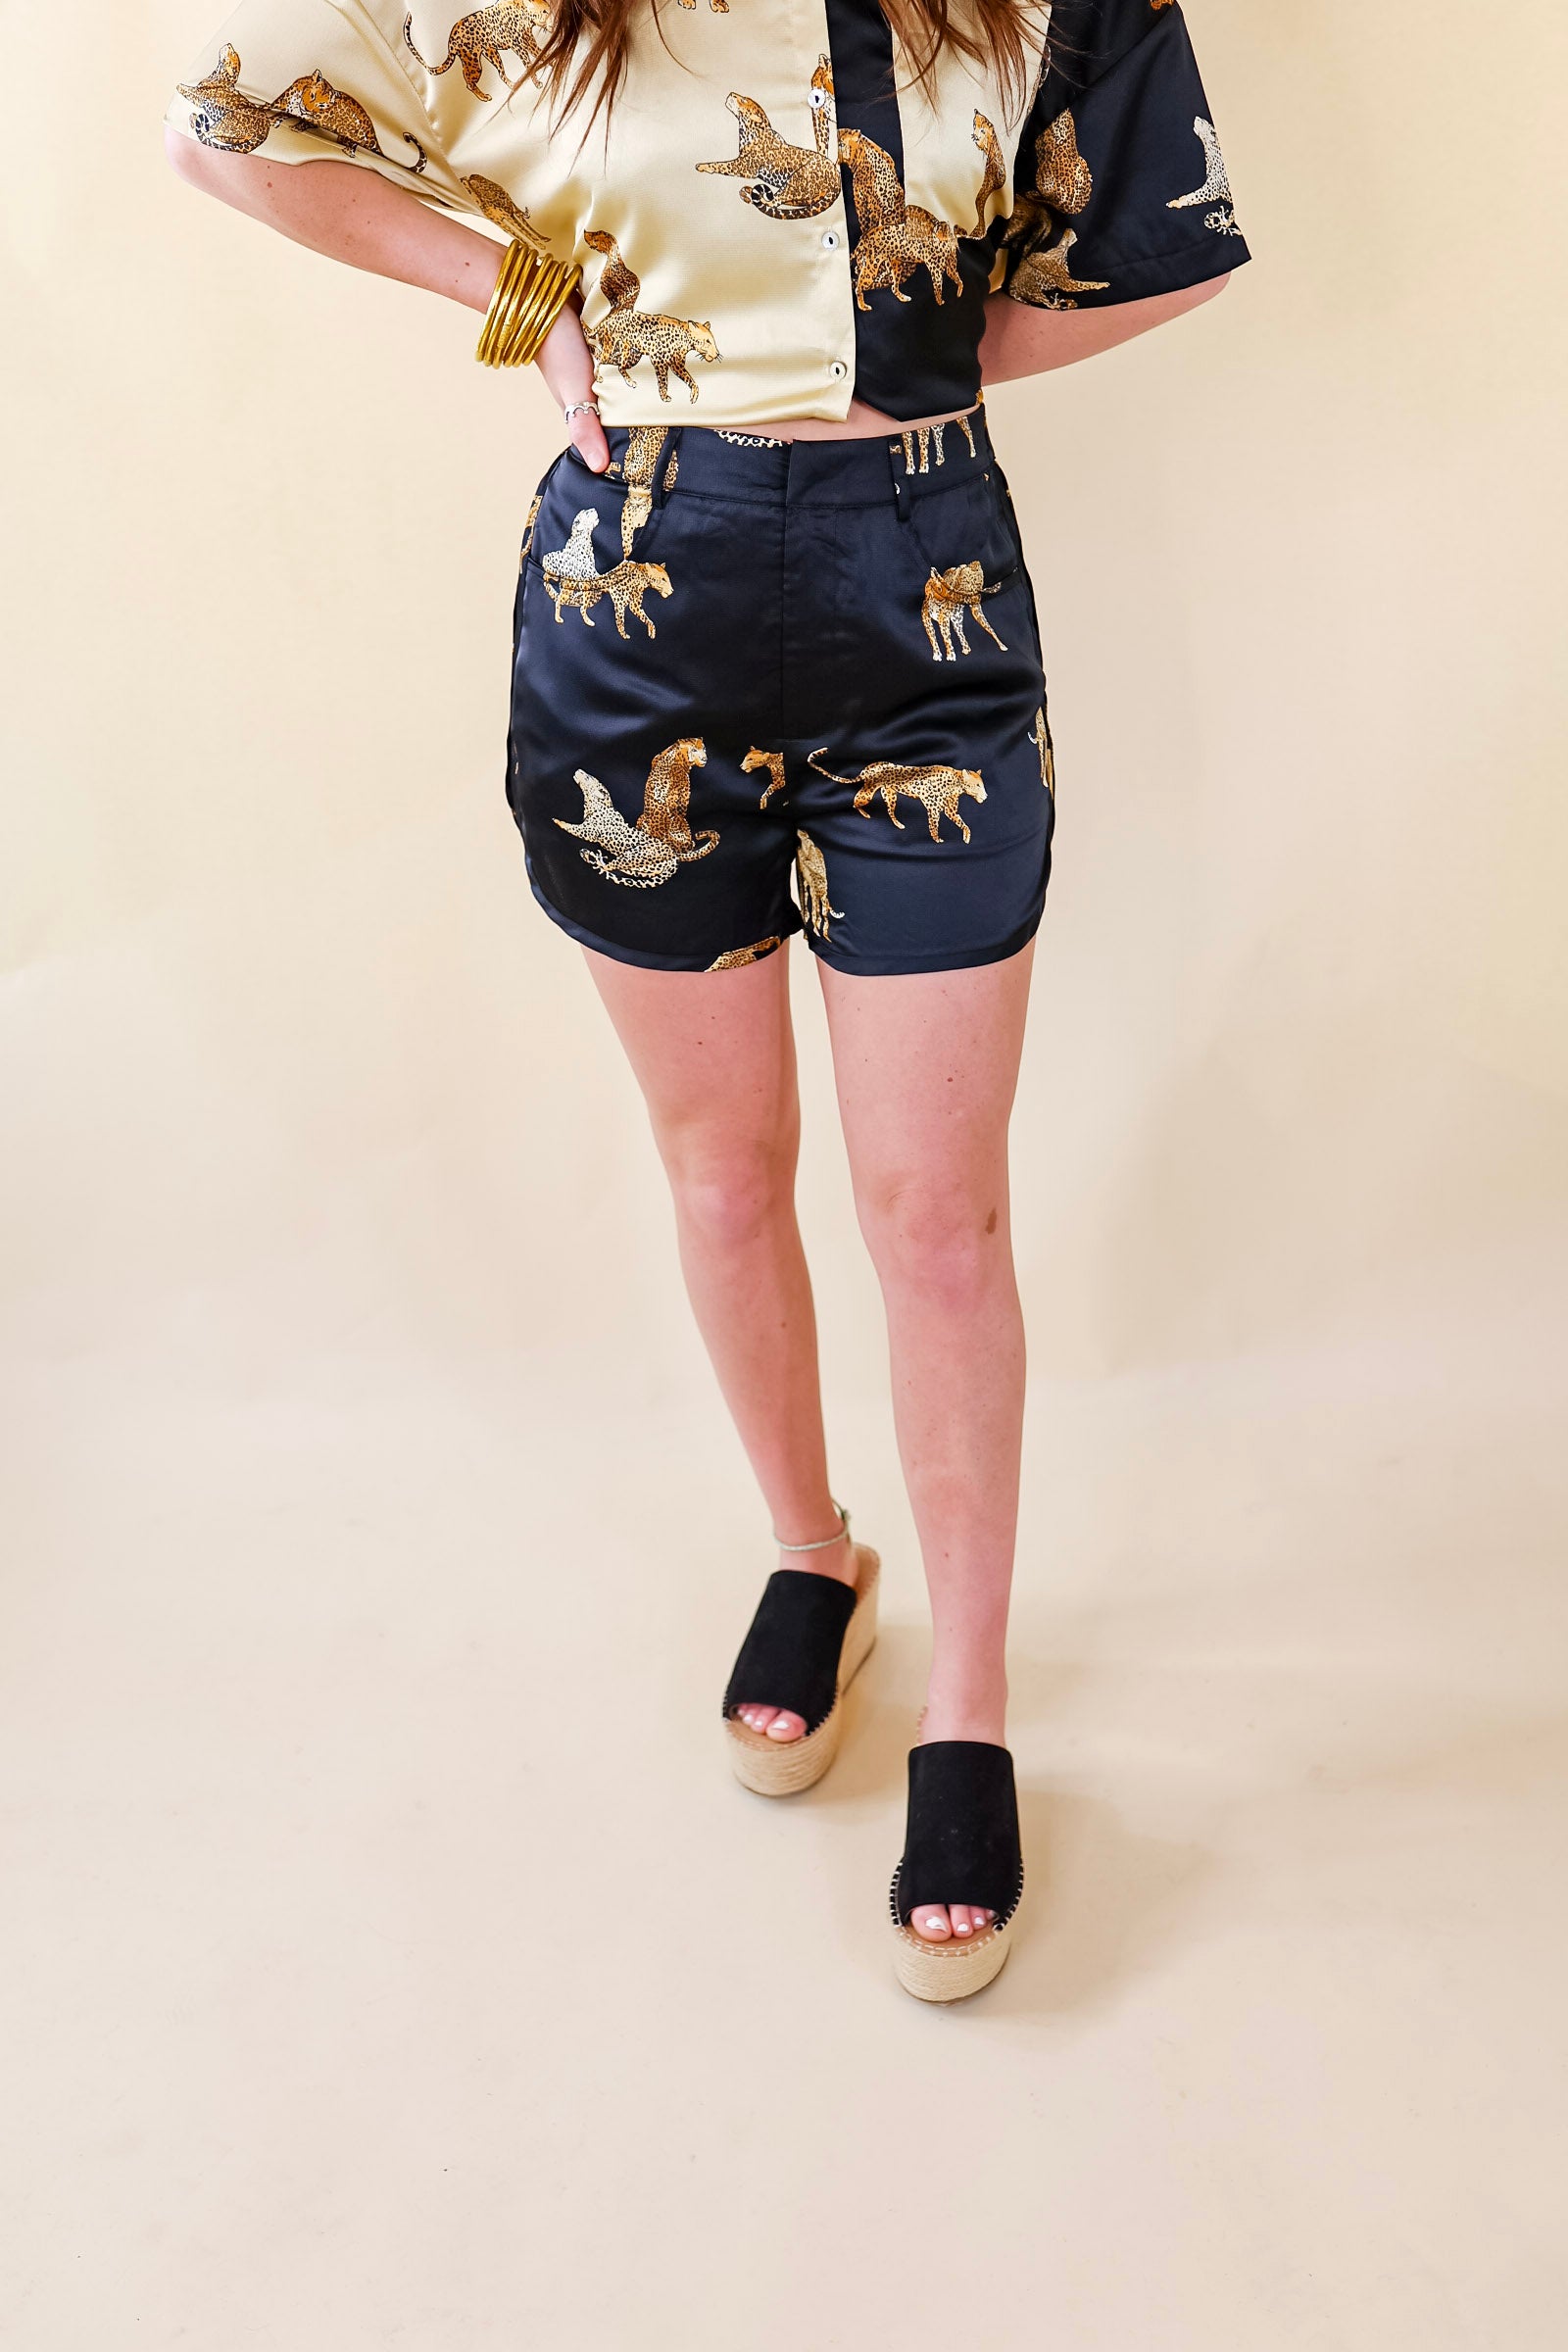 All Eyes on Me Cheetah Print Shorts in Black - Giddy Up Glamour Boutique